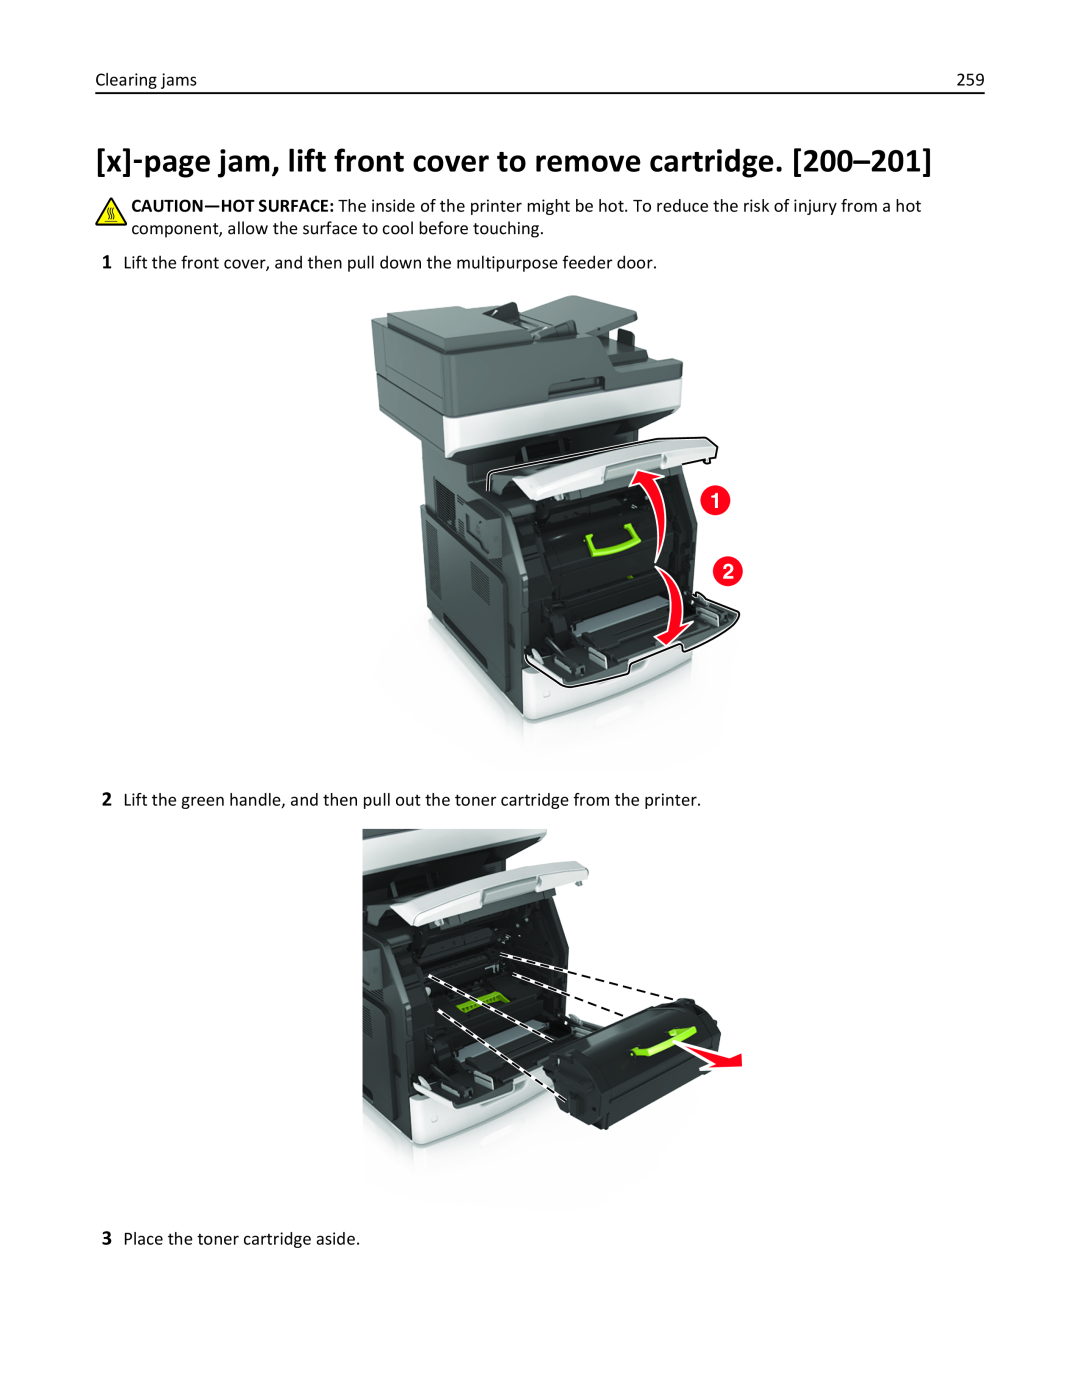 Lexmark 037, MX710DHE, 237 x‑page jam, lift front cover to remove cartridge, Clearing jams, Place the toner cartridge aside 